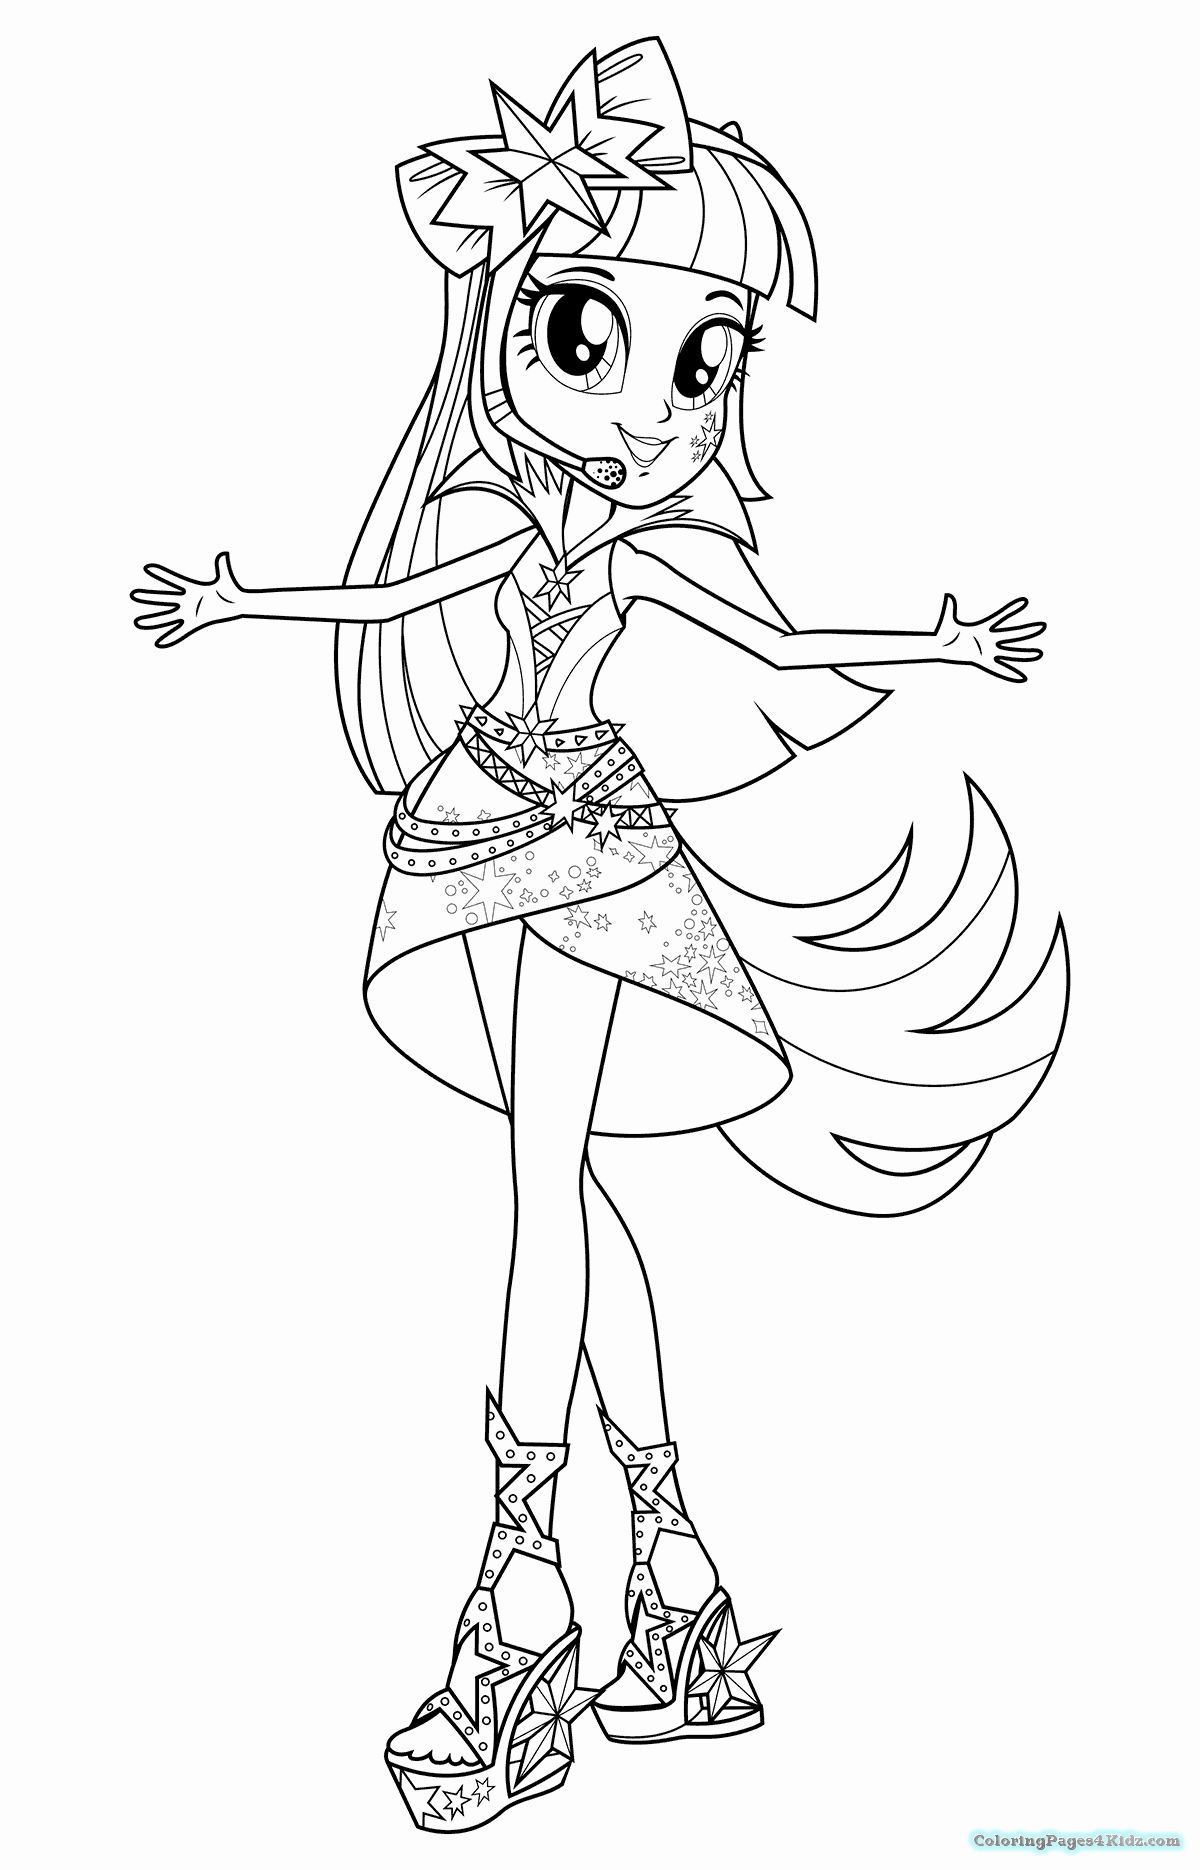 My Little Pony Equestria Girls Coloring Page Inspirational My ...